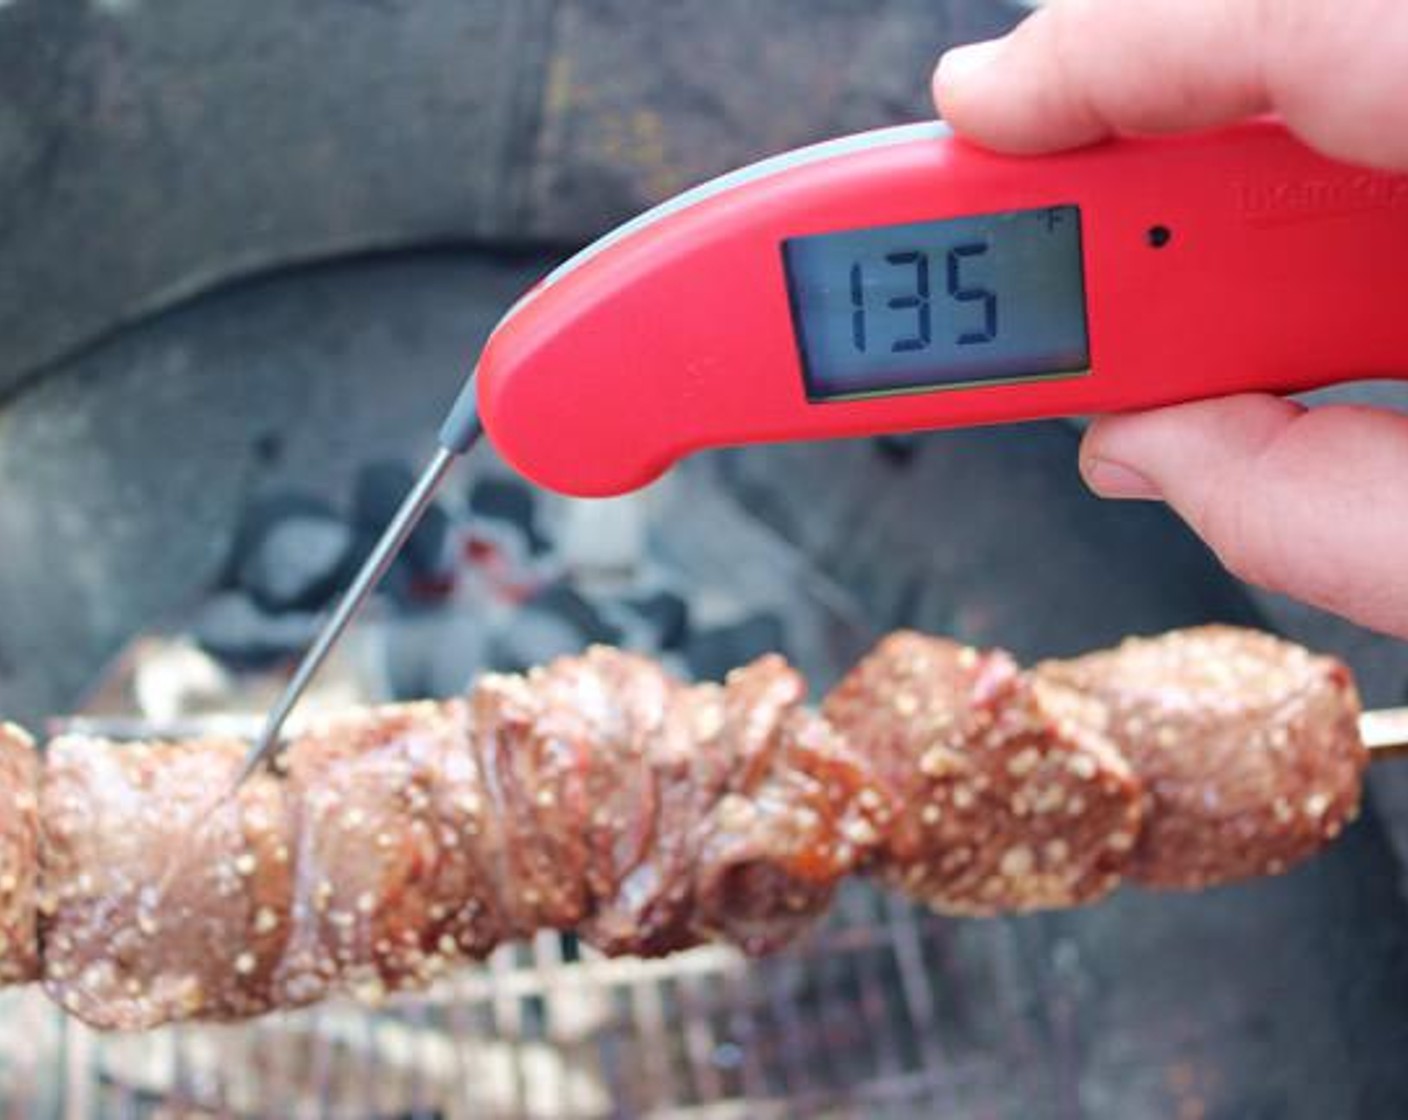 step 6 Cook over hot coals for approximately 20-25 minutes or until internal temperature reaches 130-135 degrees F (54-57 degrees C), or your preferred doneness.